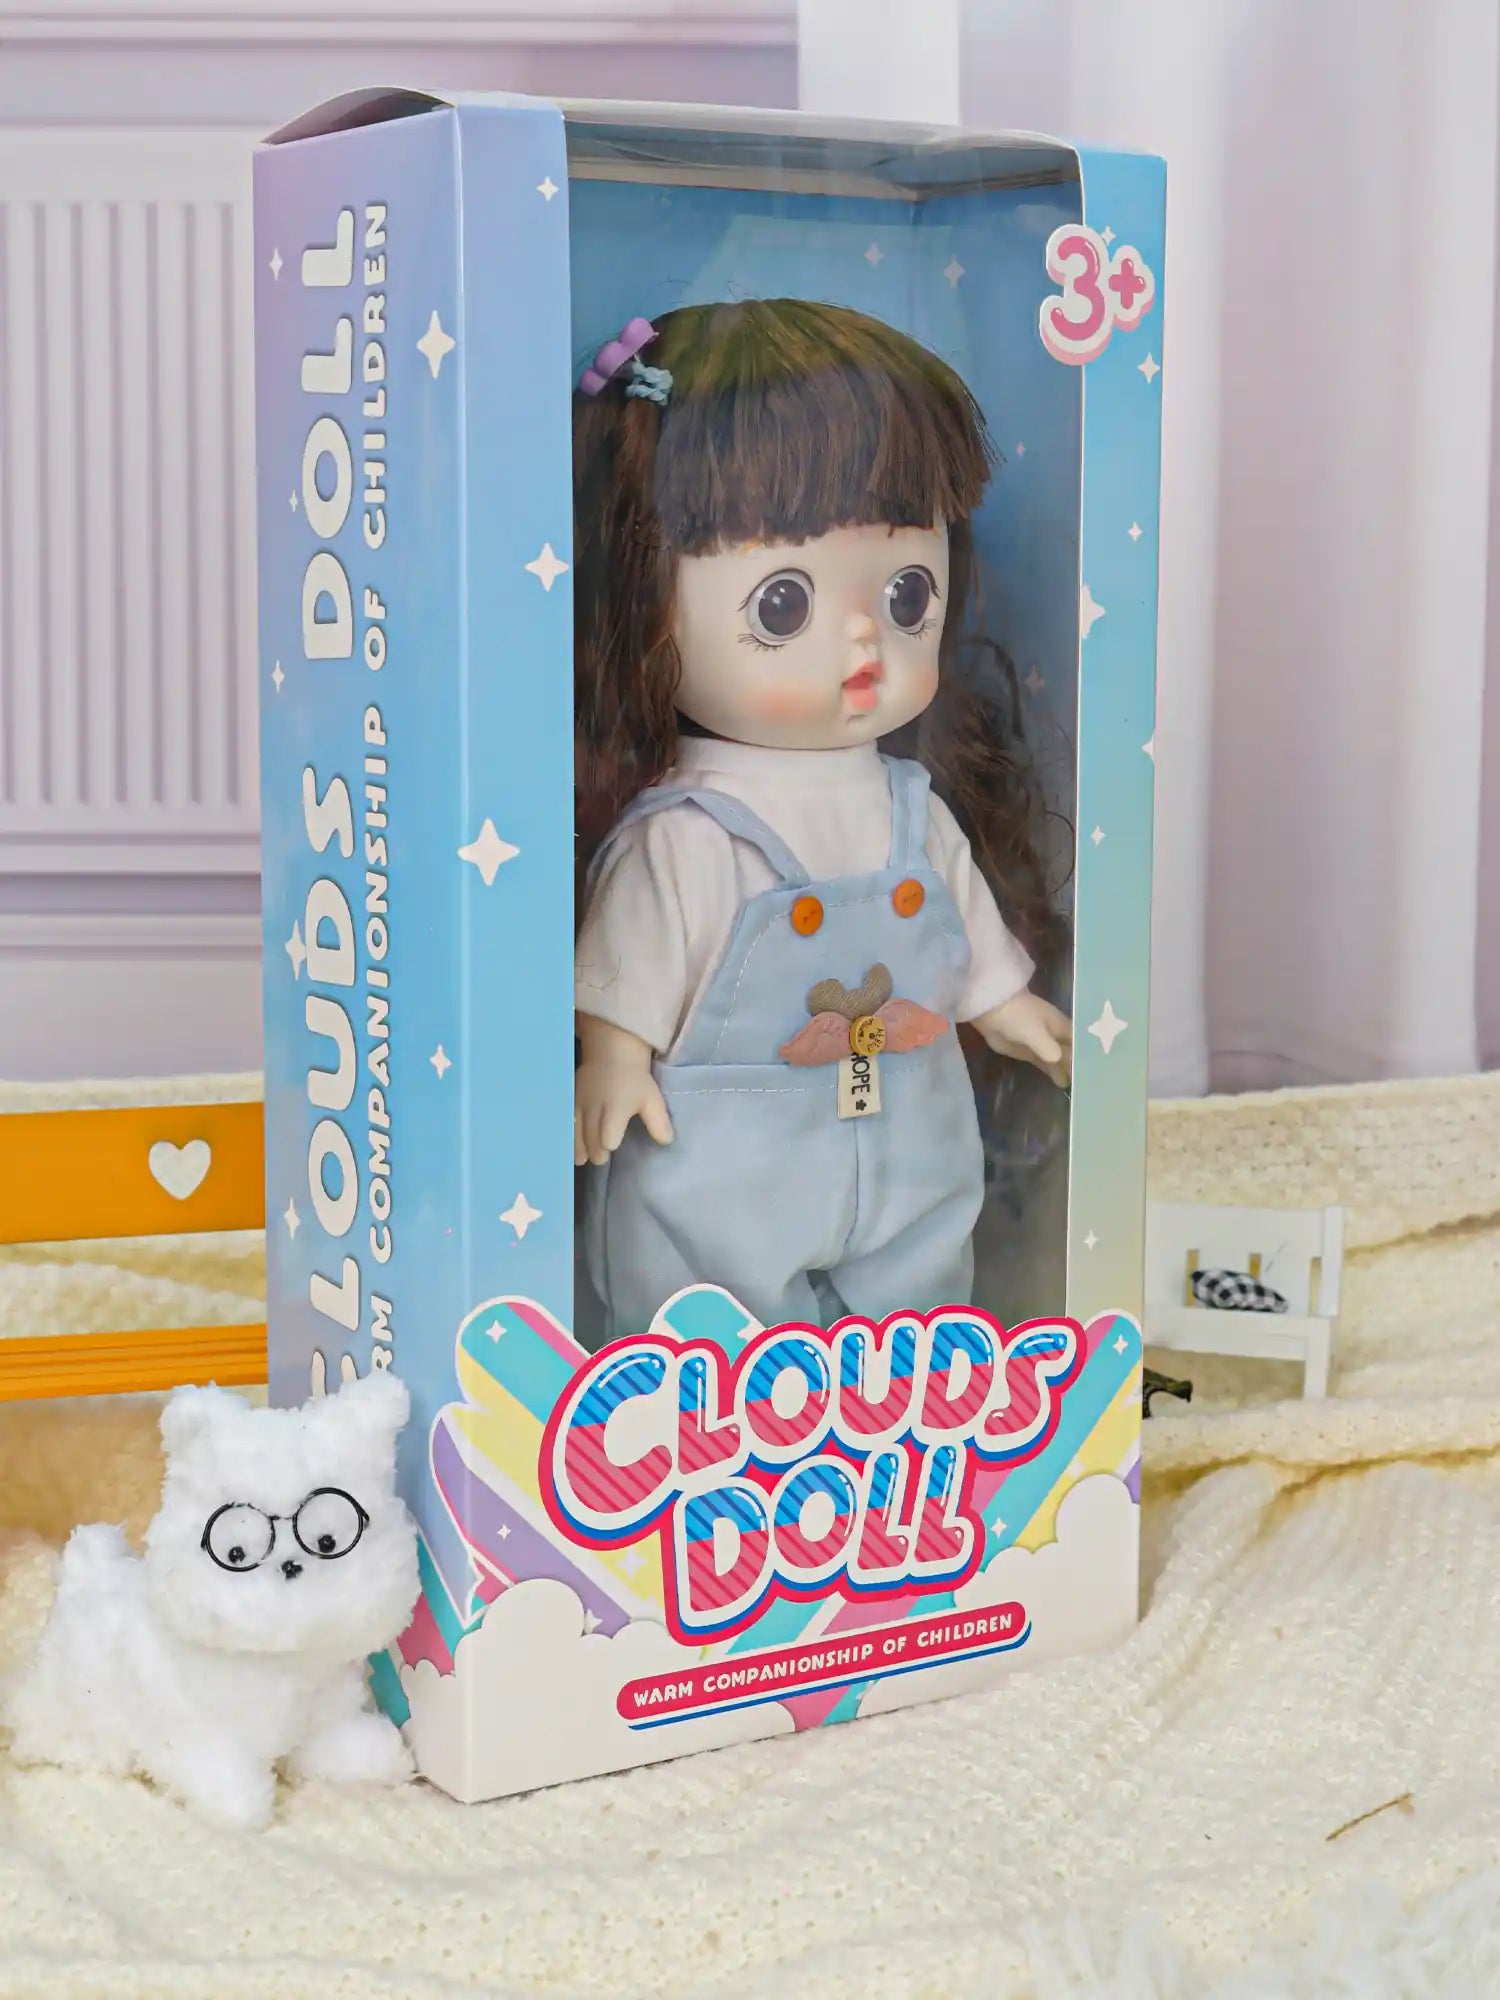 Playful doll with a purple hair clip, sporting a pastel blue jumpsuit with orange buttons, in a scene with Parisian flair.